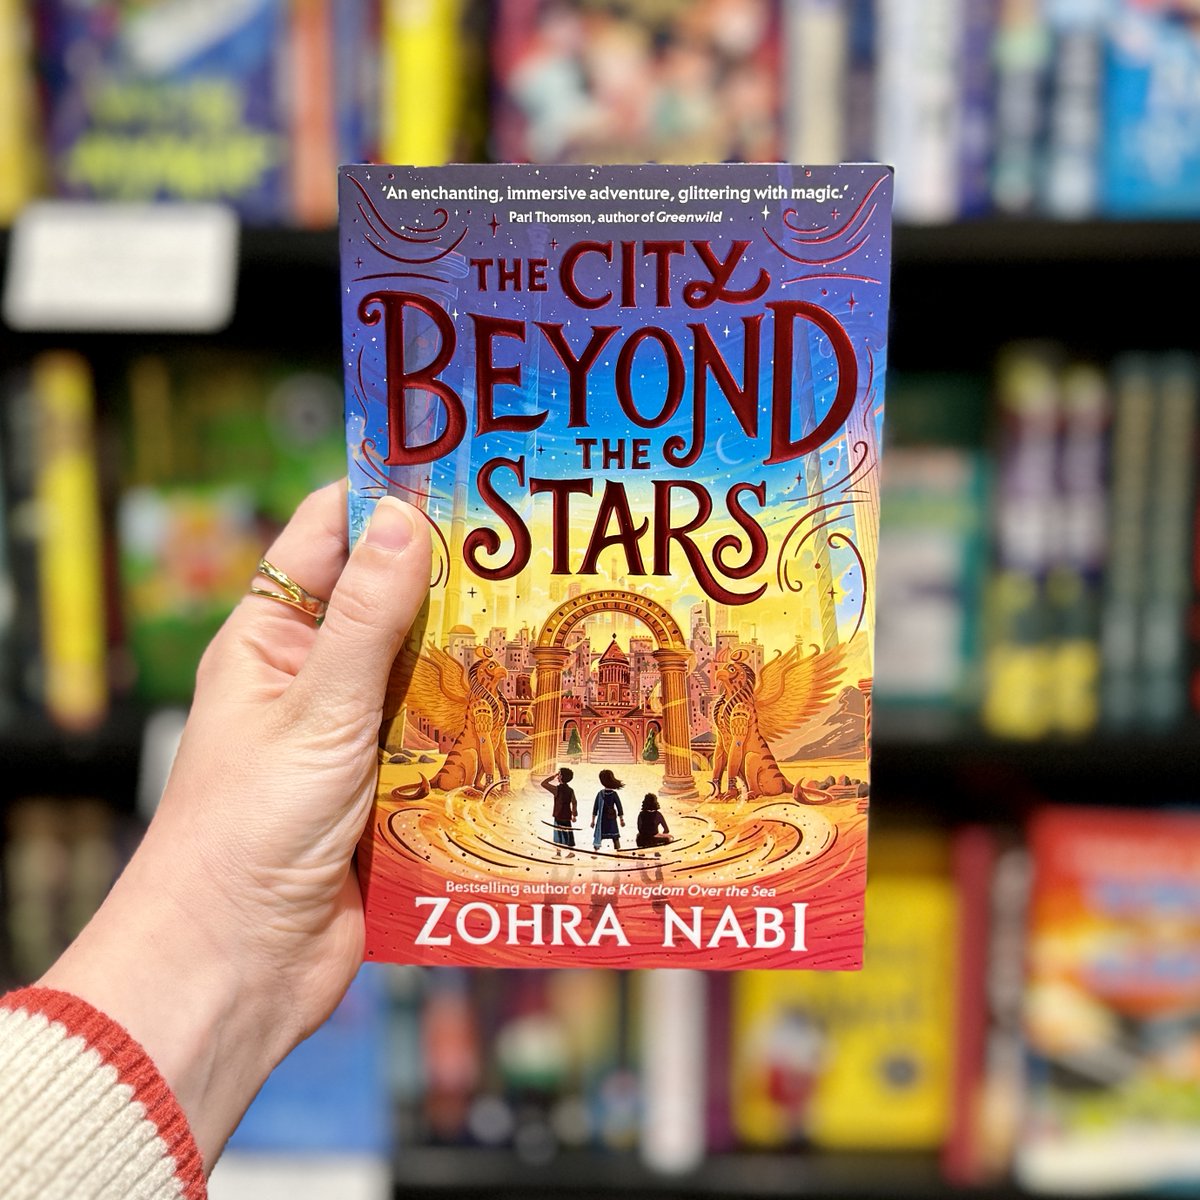 The City Beyond The Stars, @Zohra3Nabi 's spellbinding sequel to former Children's #BOTM, finds Yara adrift once more in a world of magic, intrigue and dangerous jinn as she desperately attempts to rescue her mother from the clutches of the alchemists: bit.ly/3xy5POK